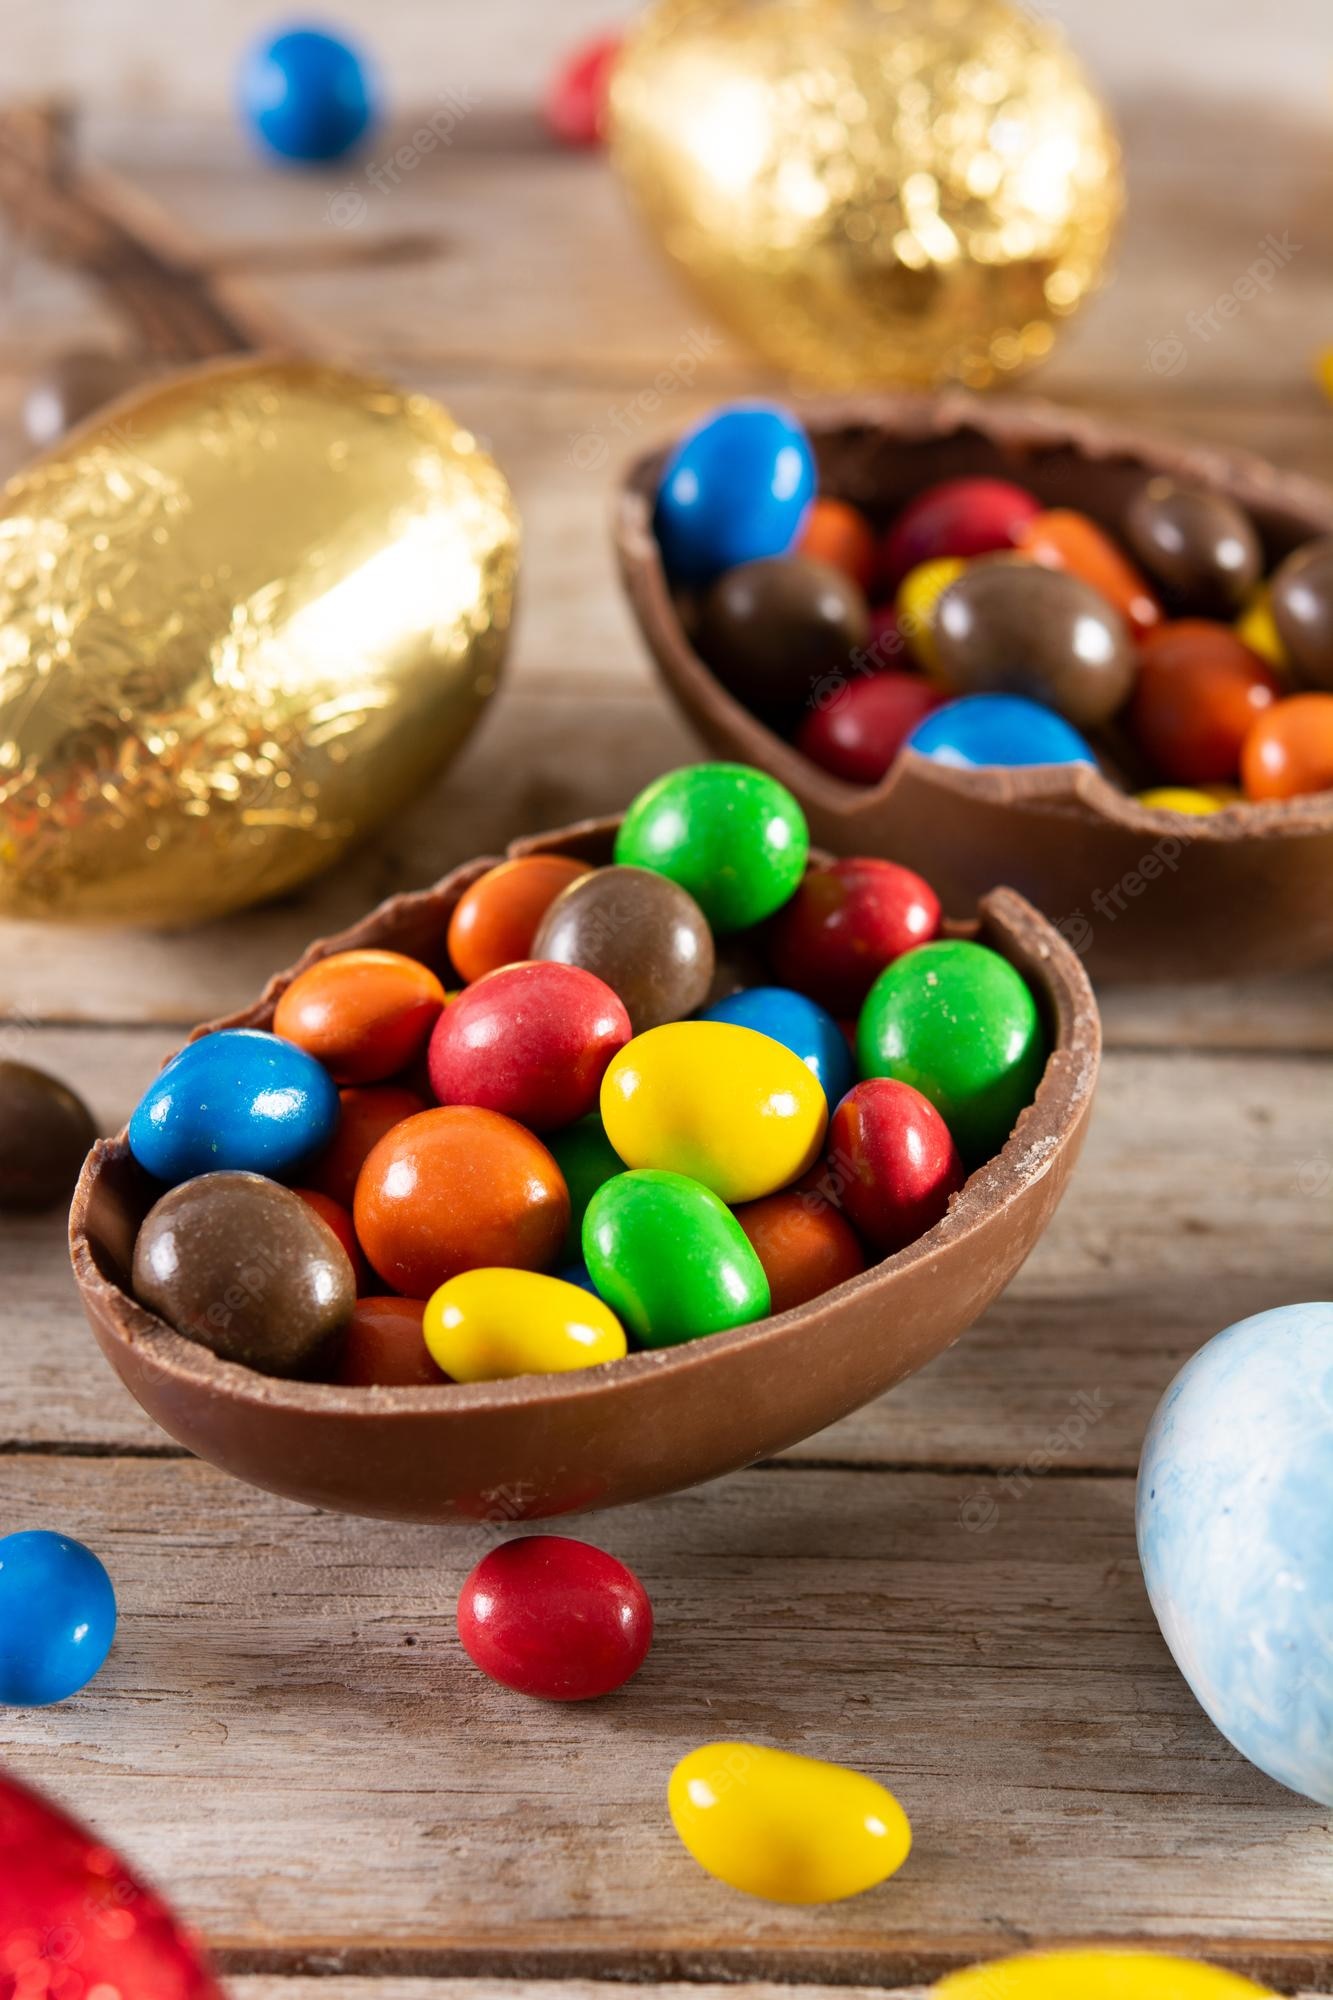 Chocolate easter eggs images